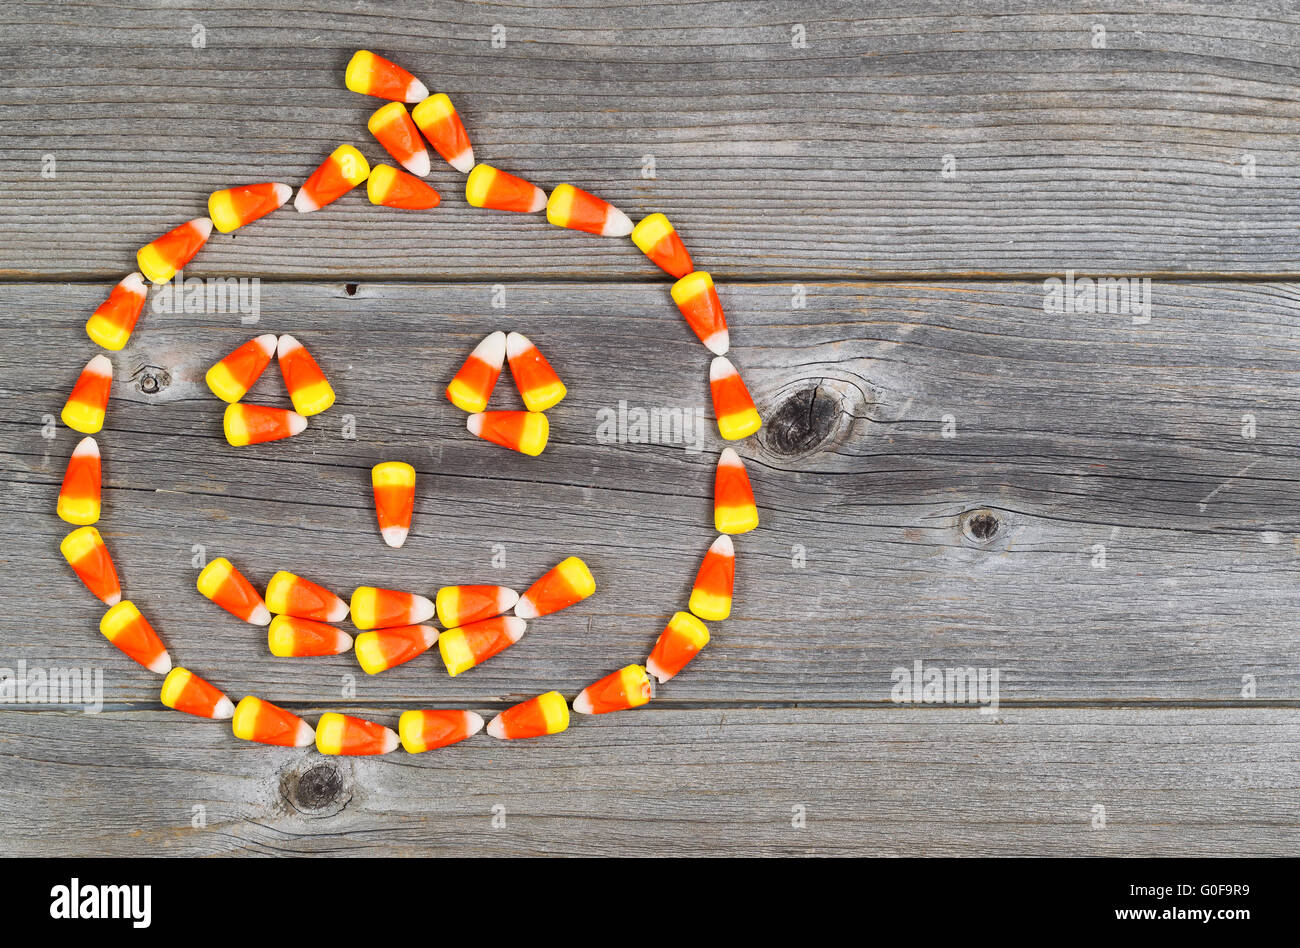 Candy shaped as Halloween Pumpkin on rustic Wood Stock Photo